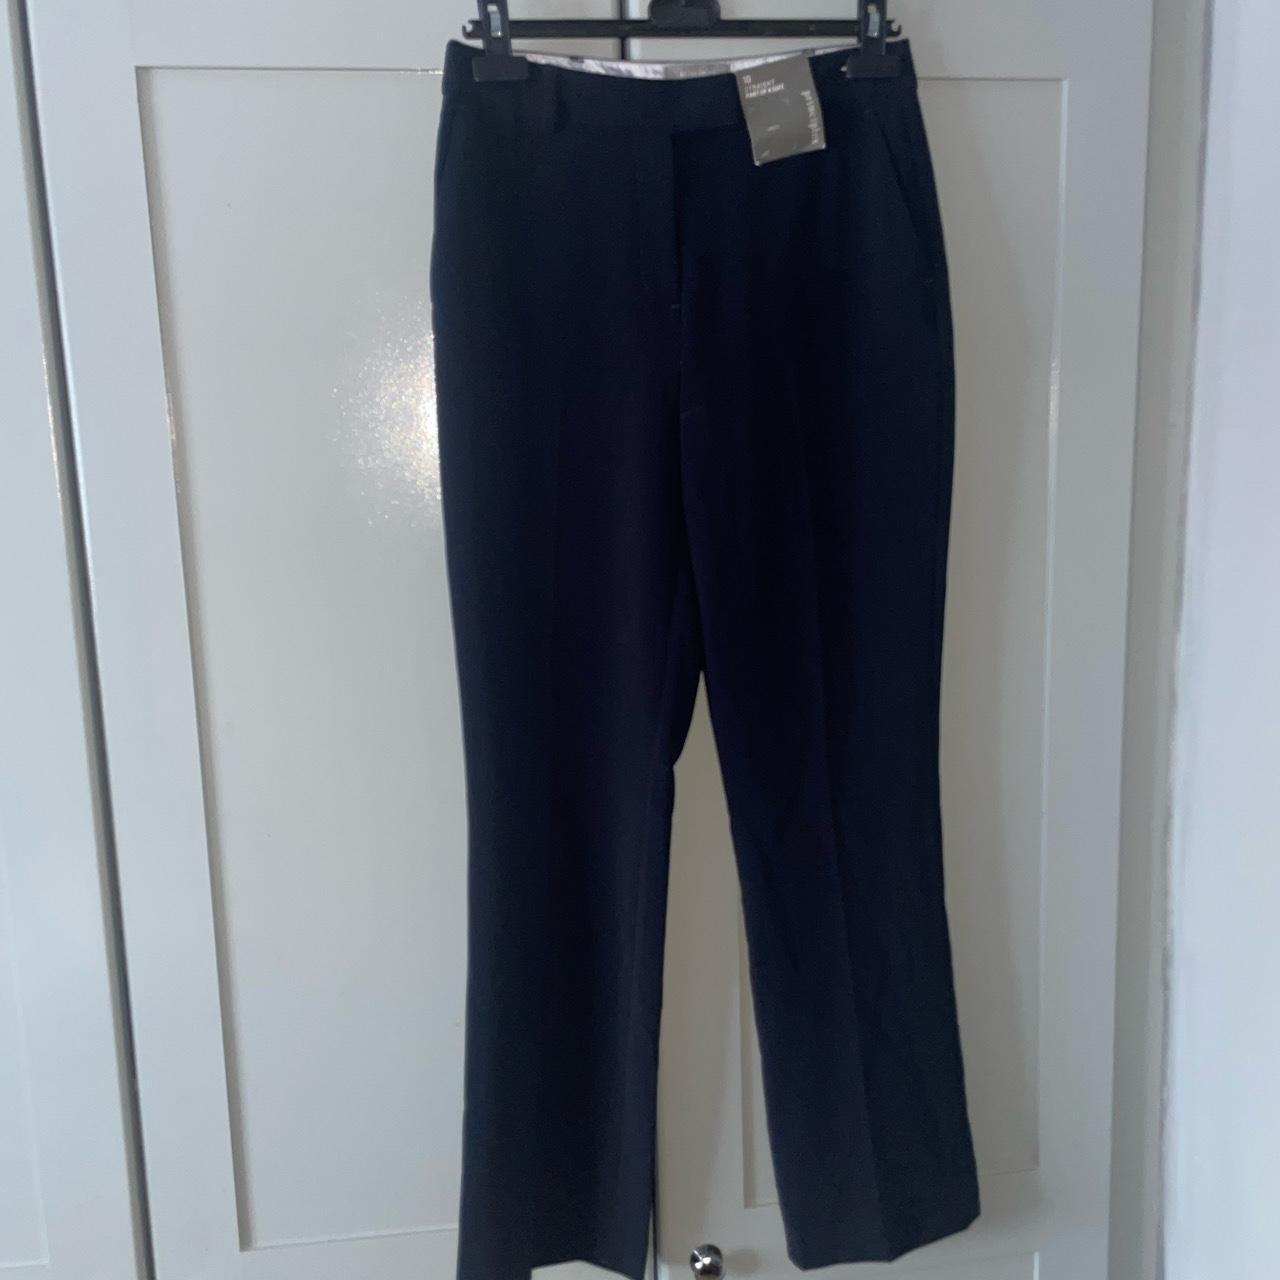 Principles Women's Navy and Blue Trousers | Depop